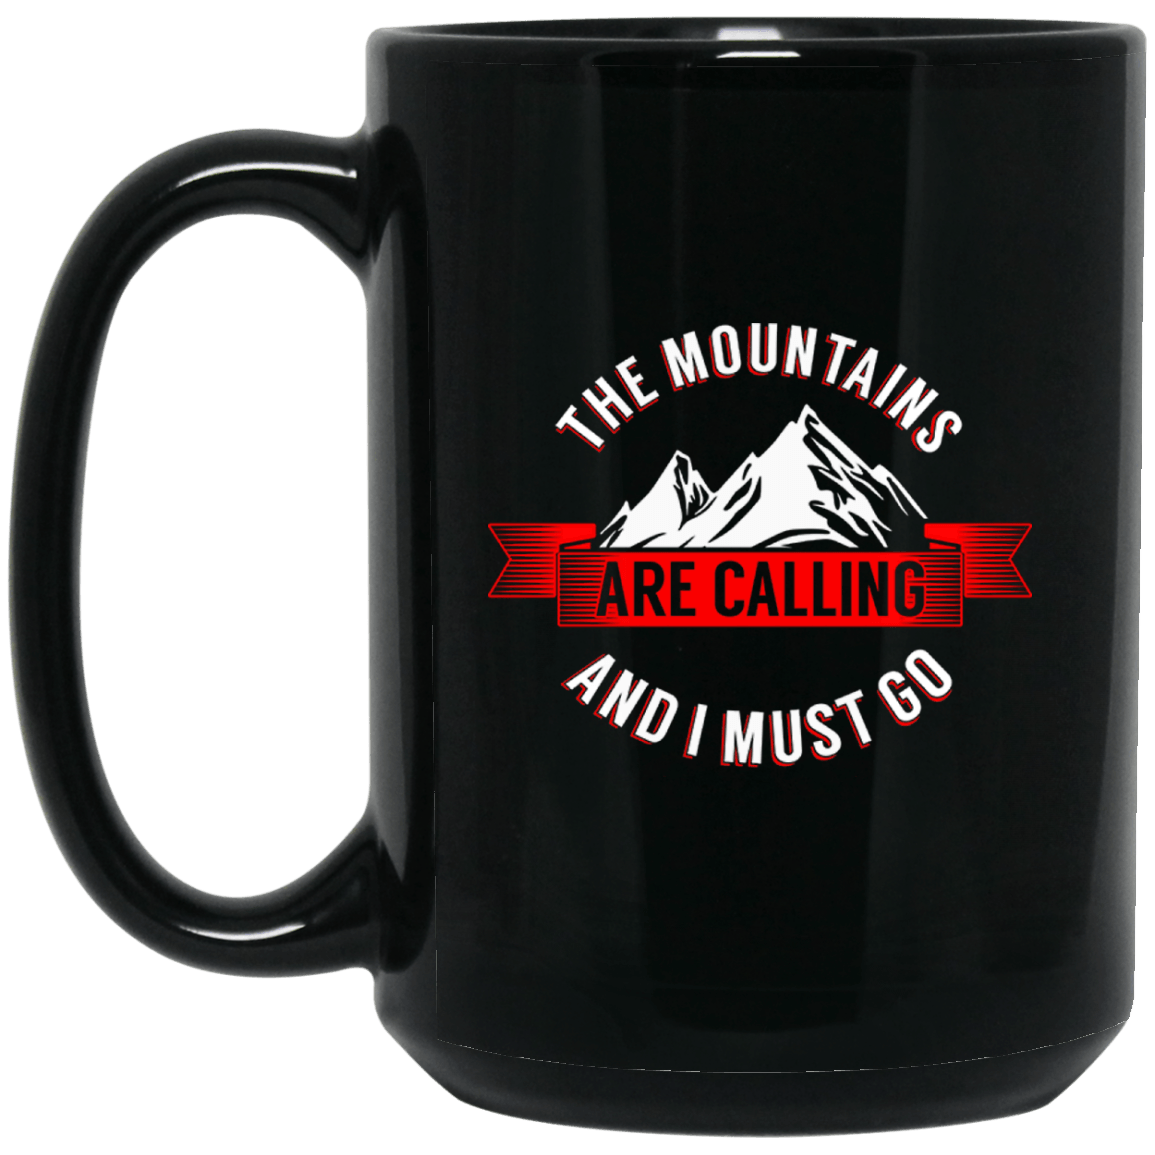 The Mountains Are Calling And I Must Go Black Mug - Powderaddicts